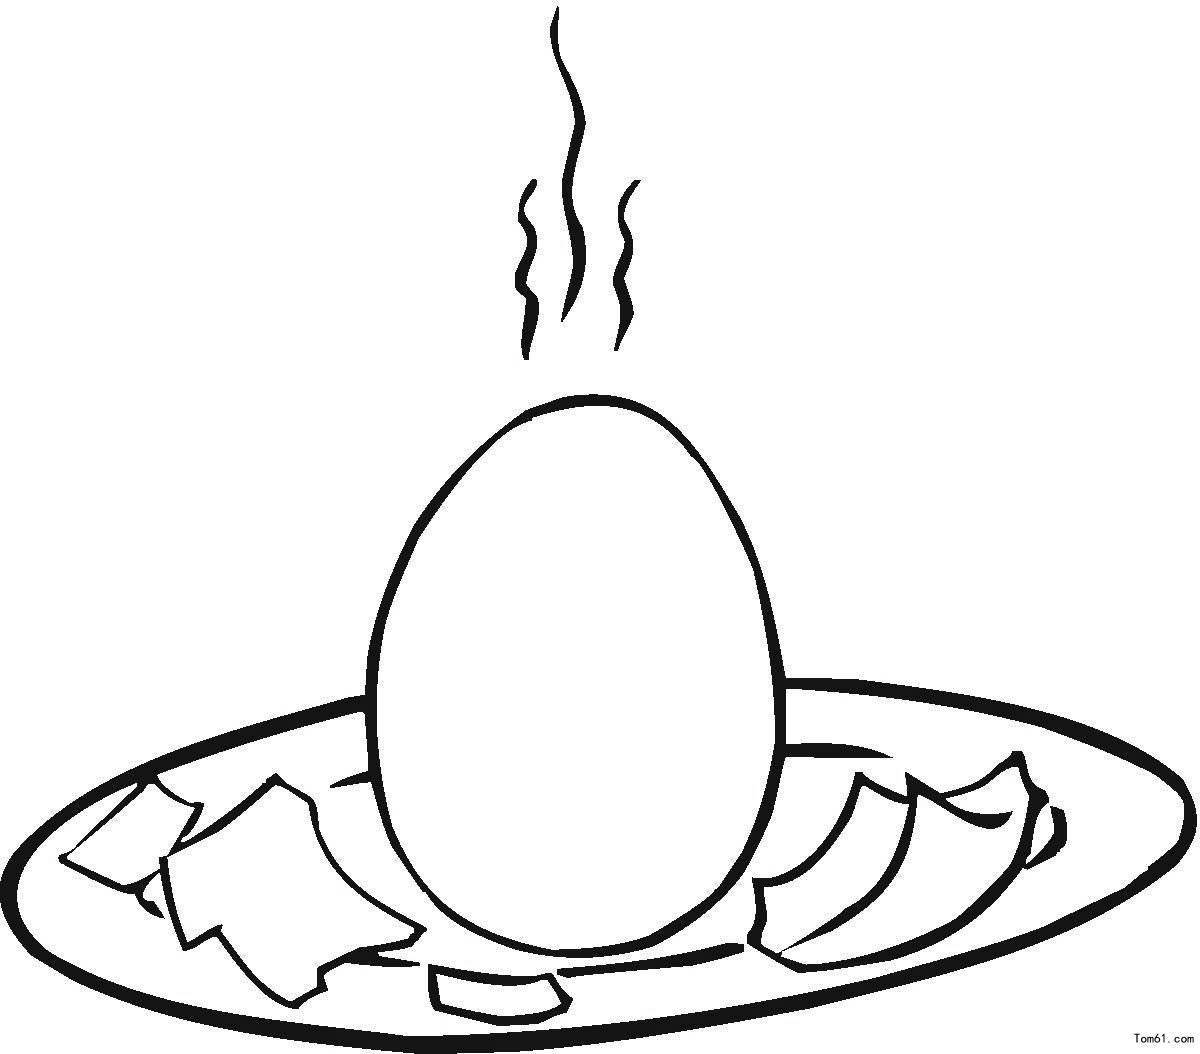 Living chicken egg coloring page